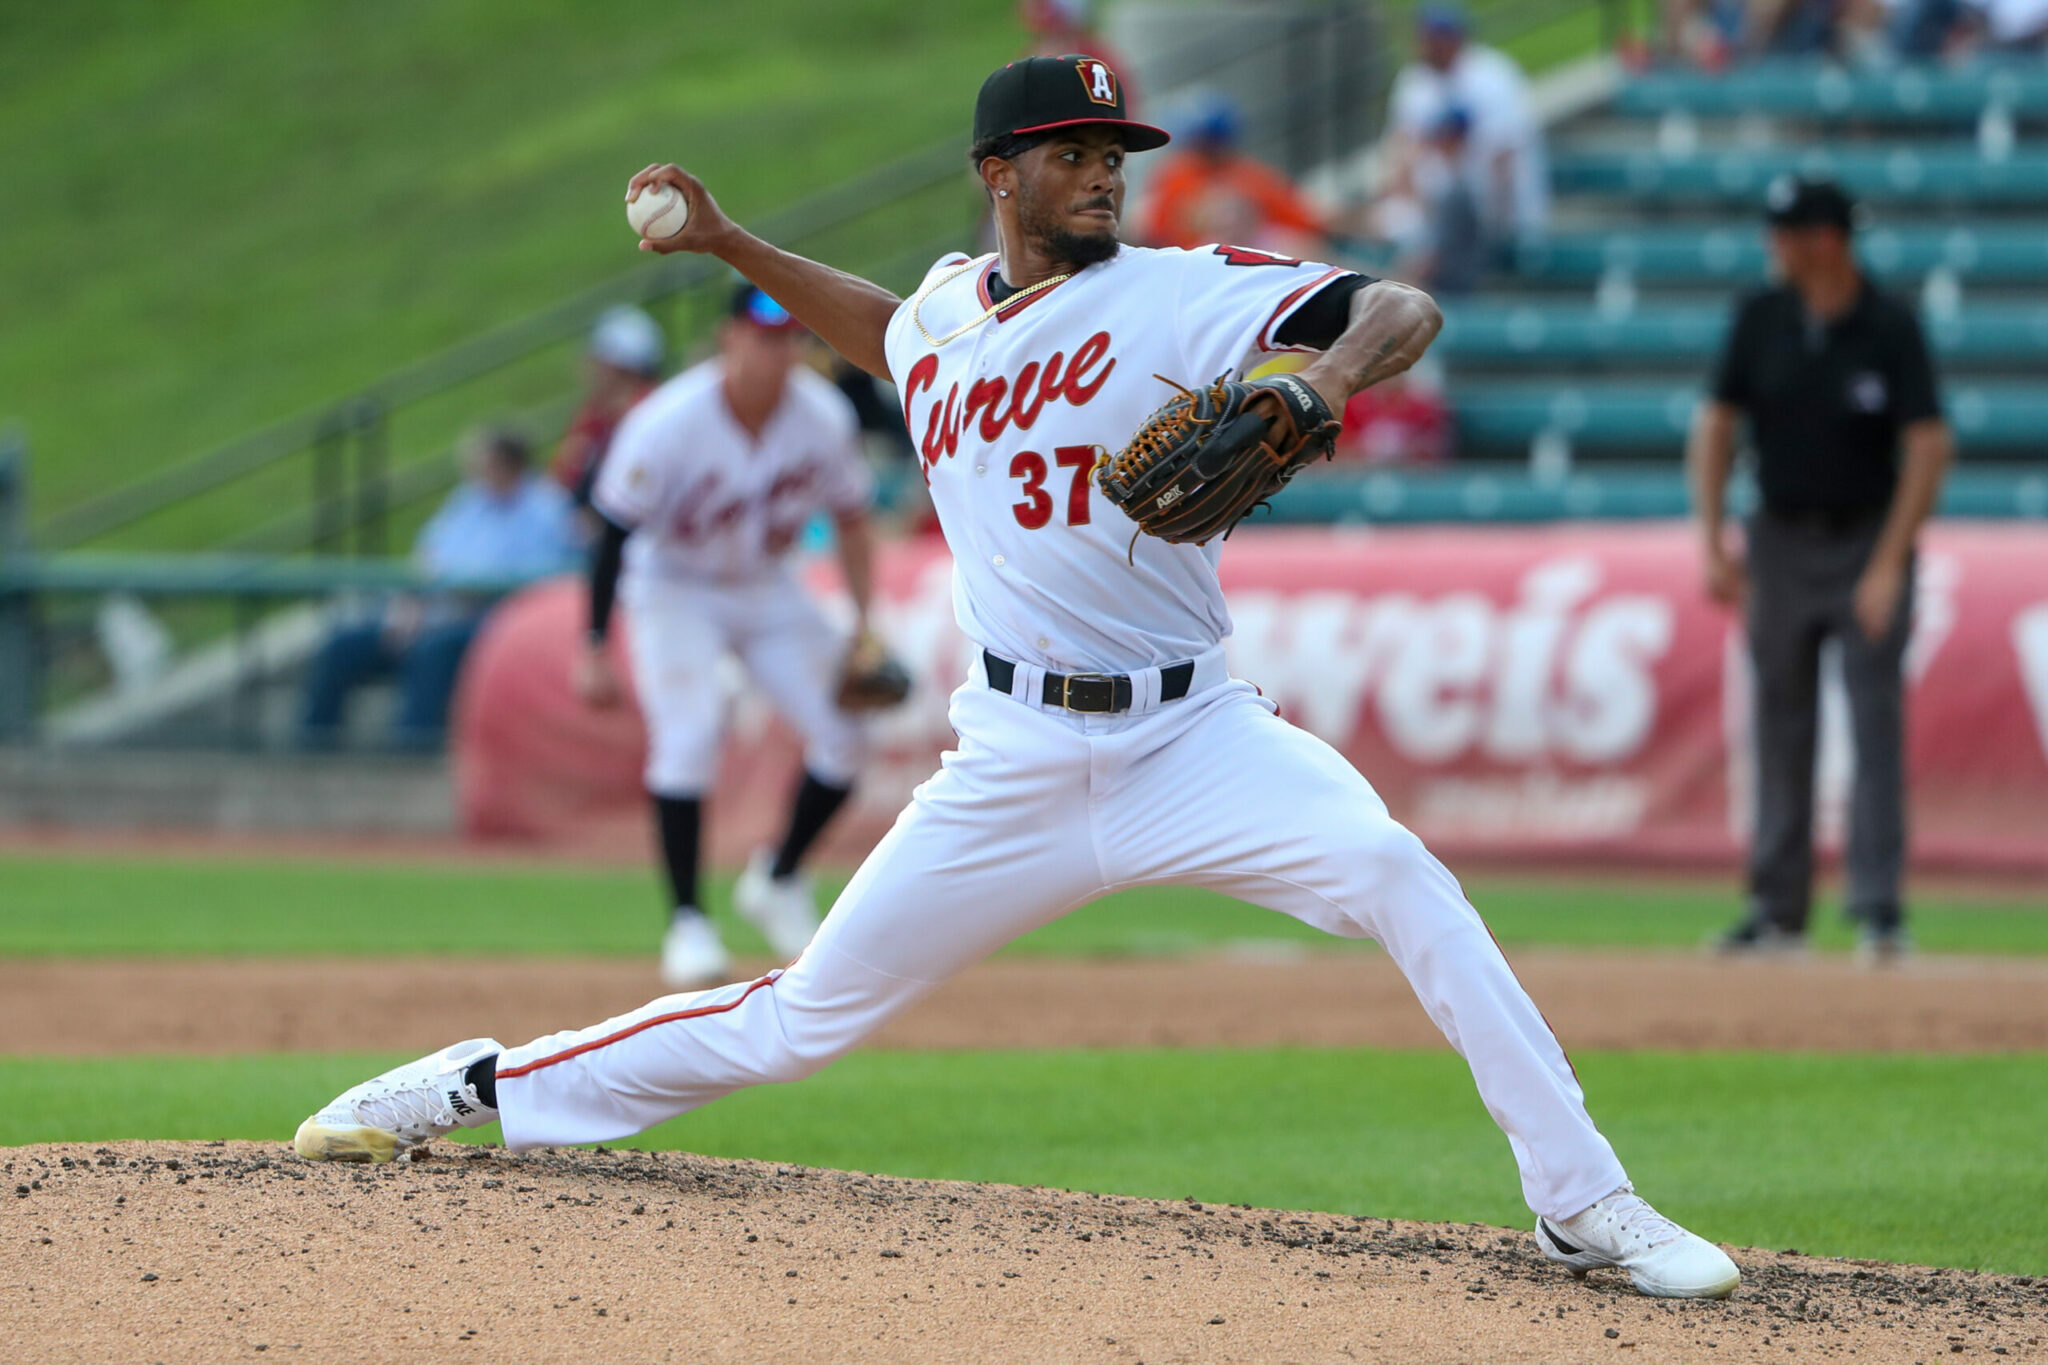 Pirates Prospects Daily: J.C. Flowers Was a Super Utility Pitcher For Altoona